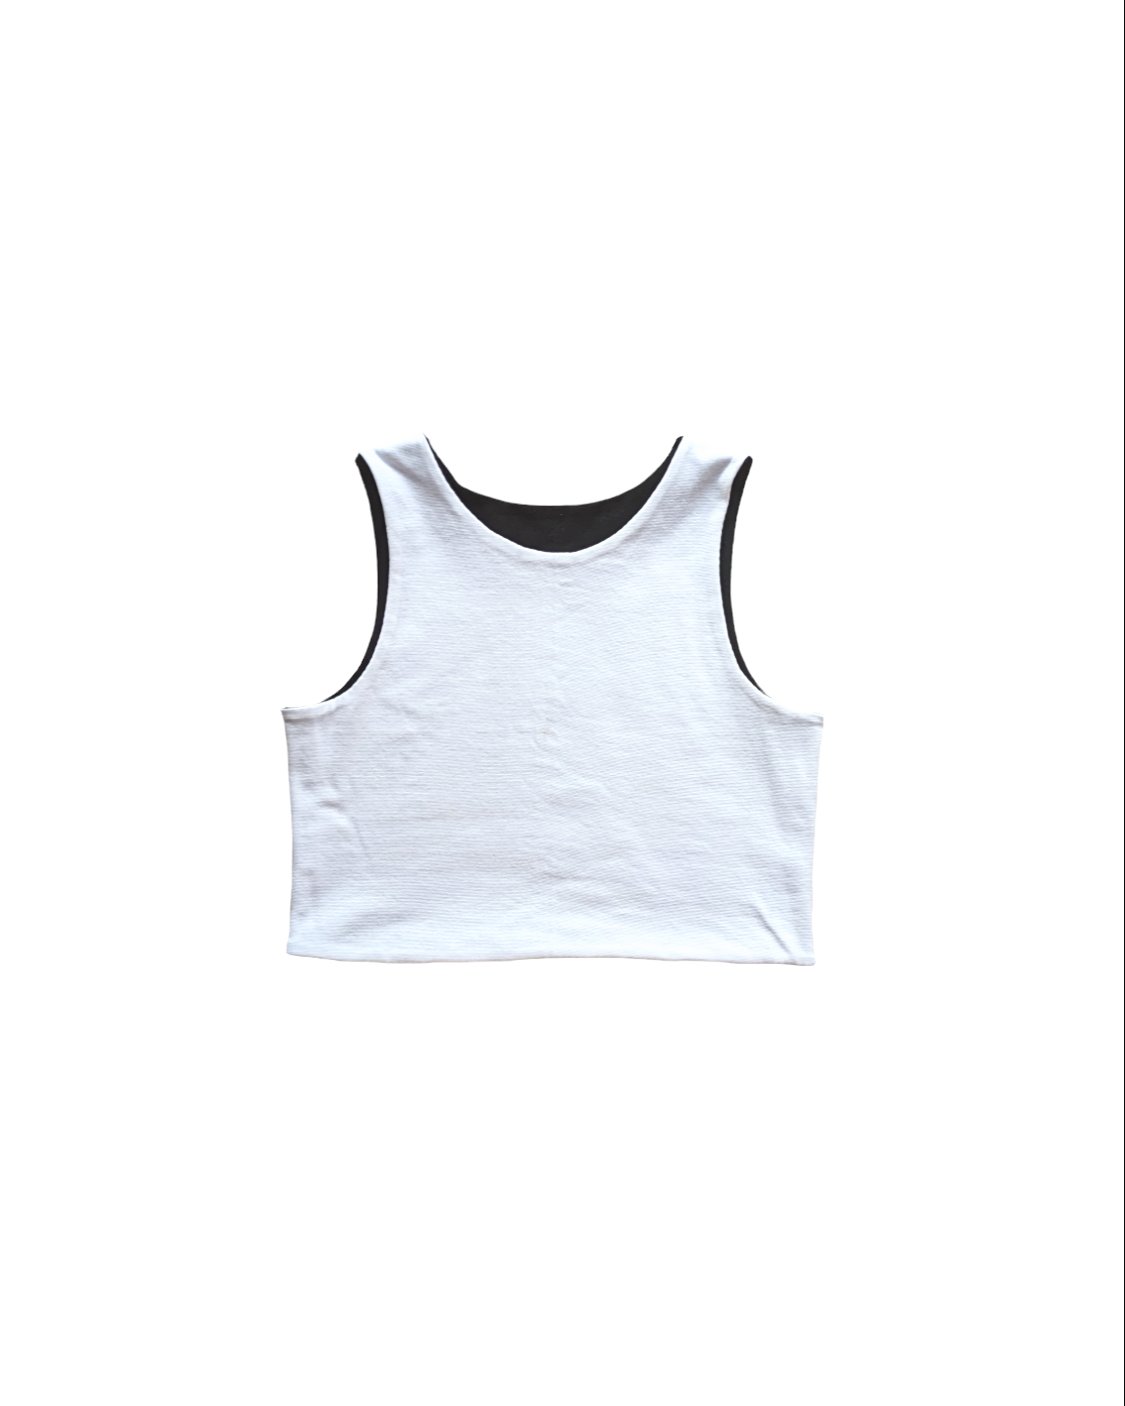 Image of CATCALL: THE REVERSIBLE CROP TOP in WHITE